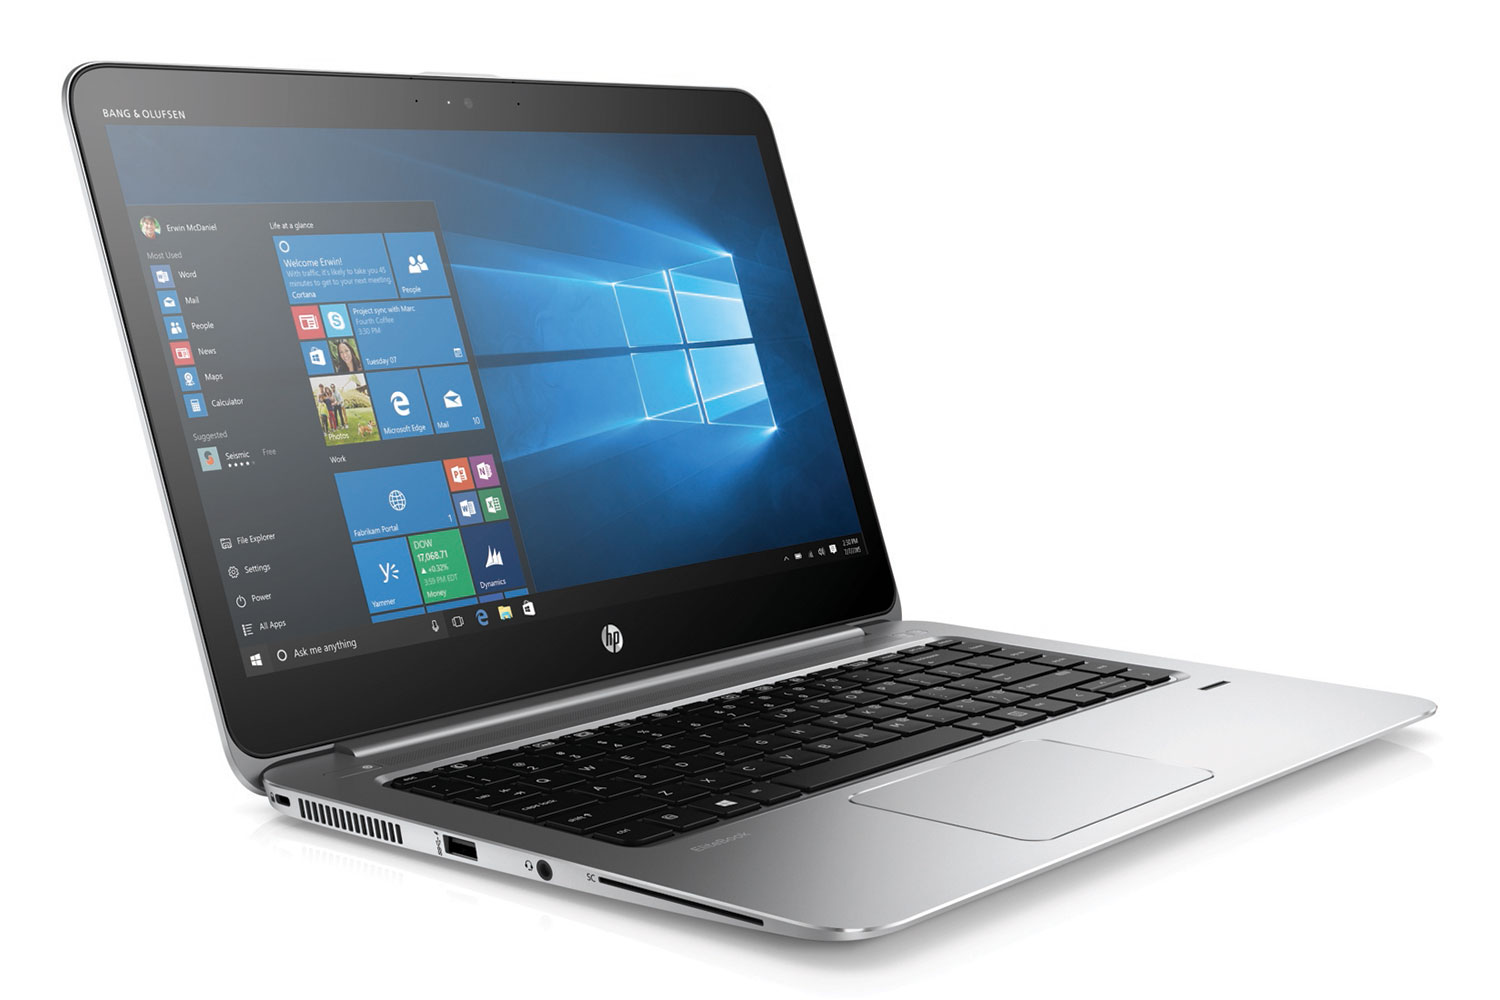 hps new elitebook folio is a half inch thick laptop with 4k display hp 1040 g3 hp20151118497